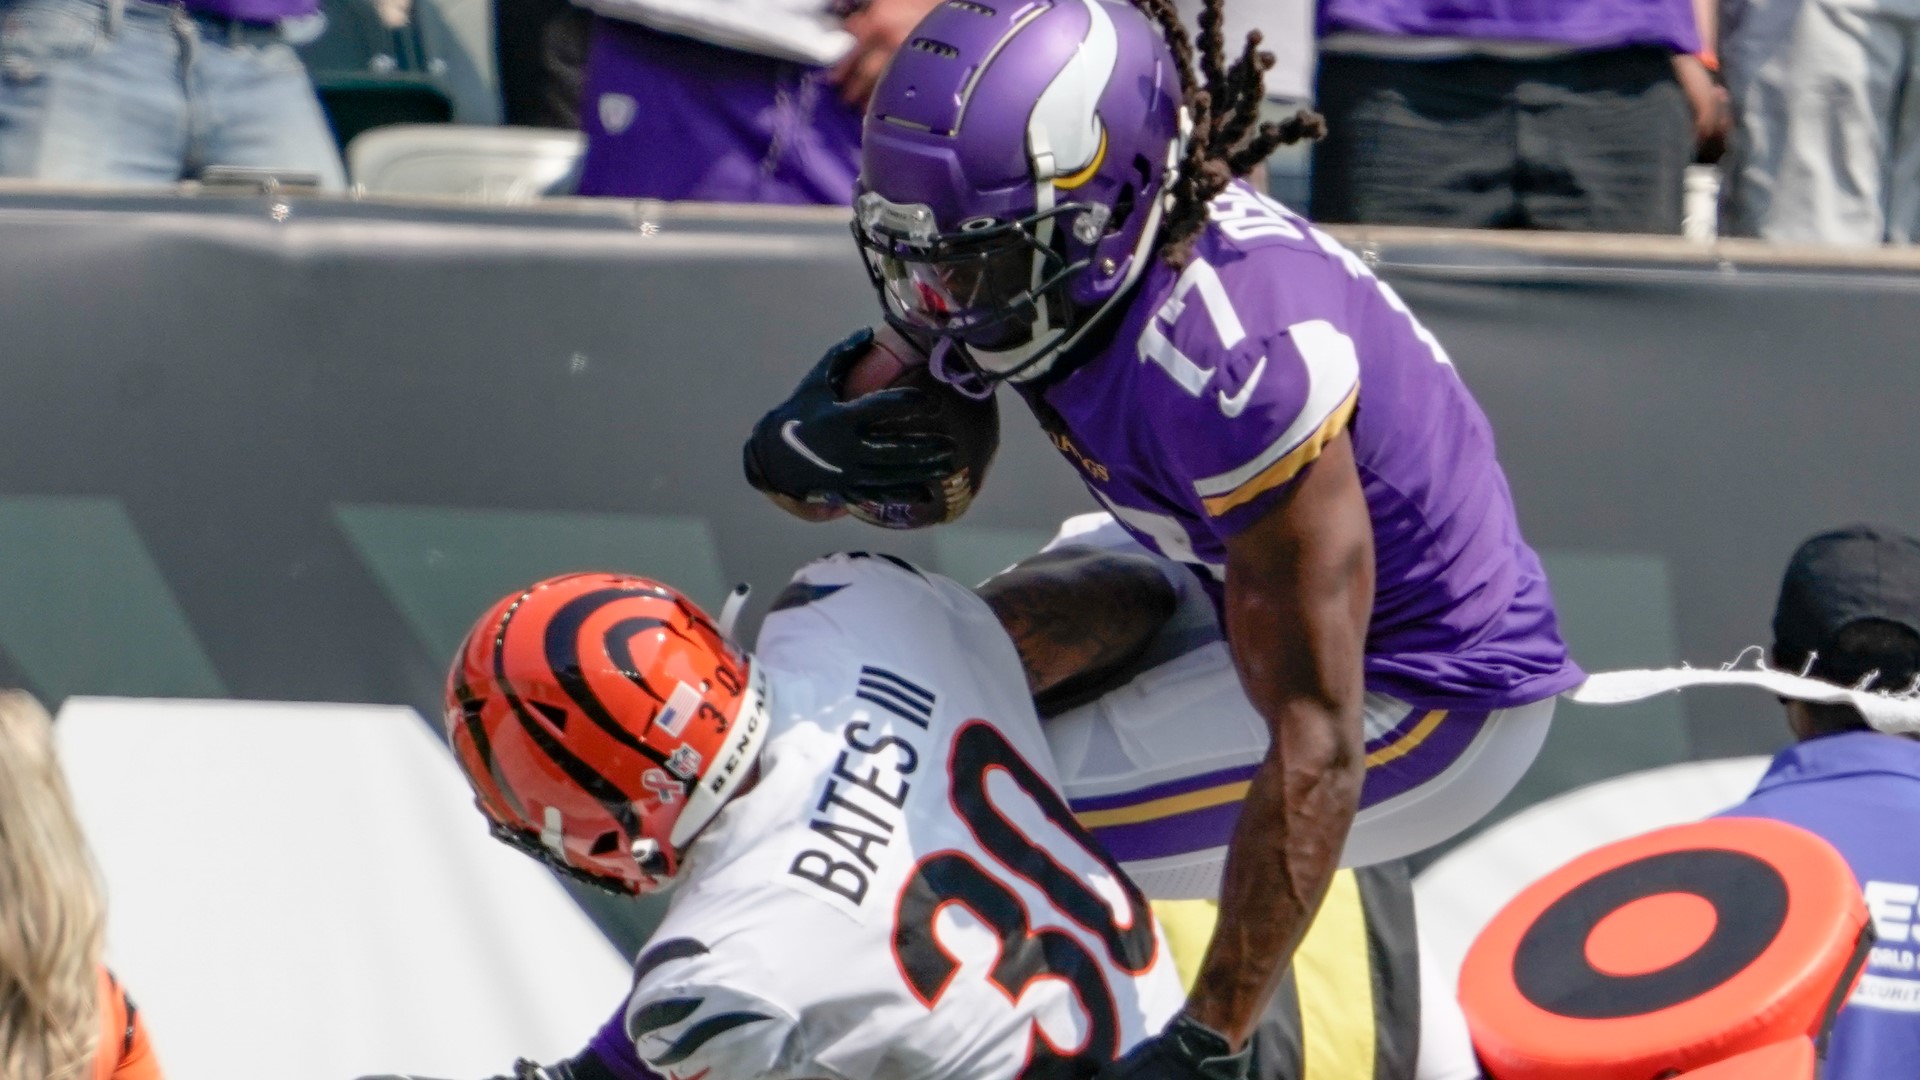 Dave Schwartz conducts a post-game analysis following the Vikings overtime loss against the Bengals in week 1.